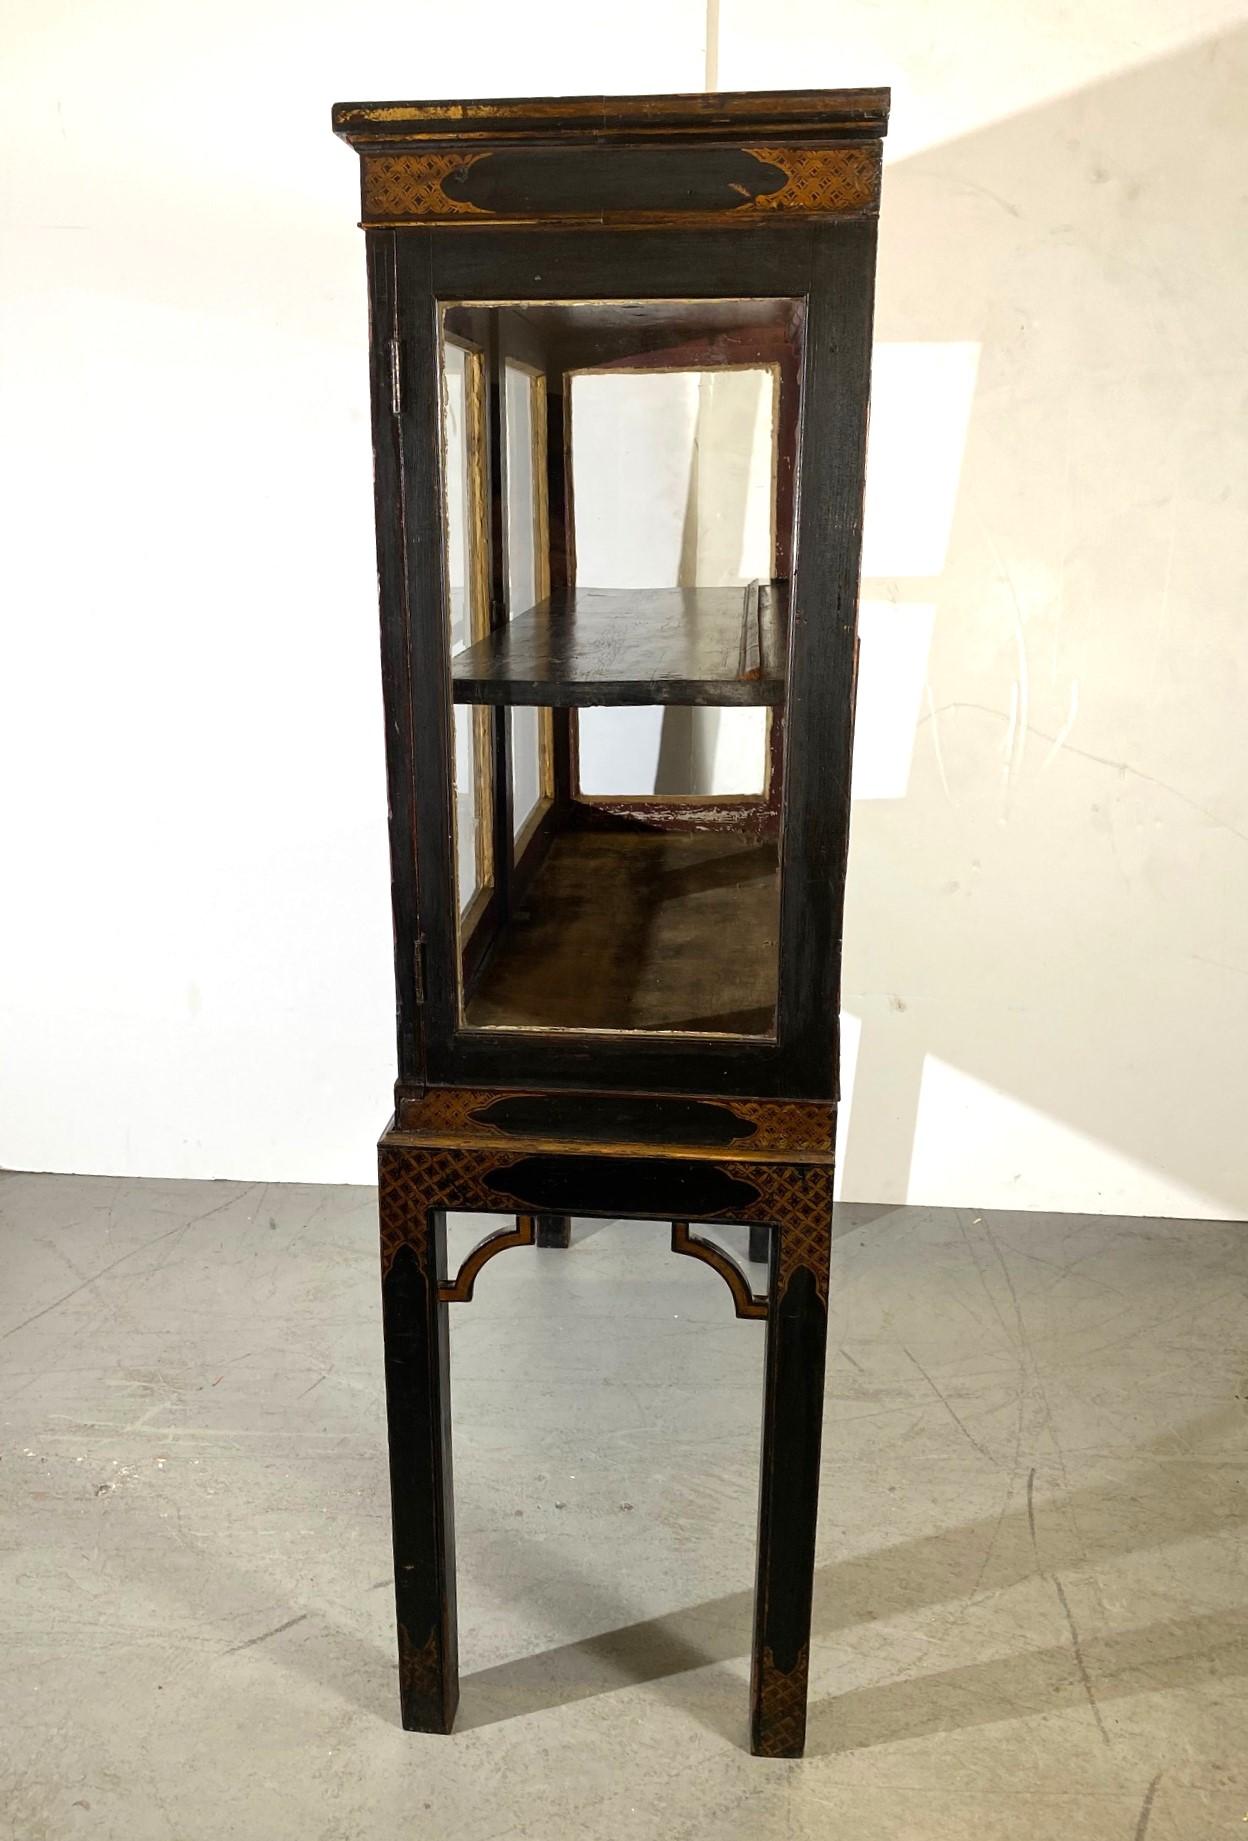 Late 19th century English chinoiserie decorated display cabinet. The hinged top opens to reveal a remote document storage.